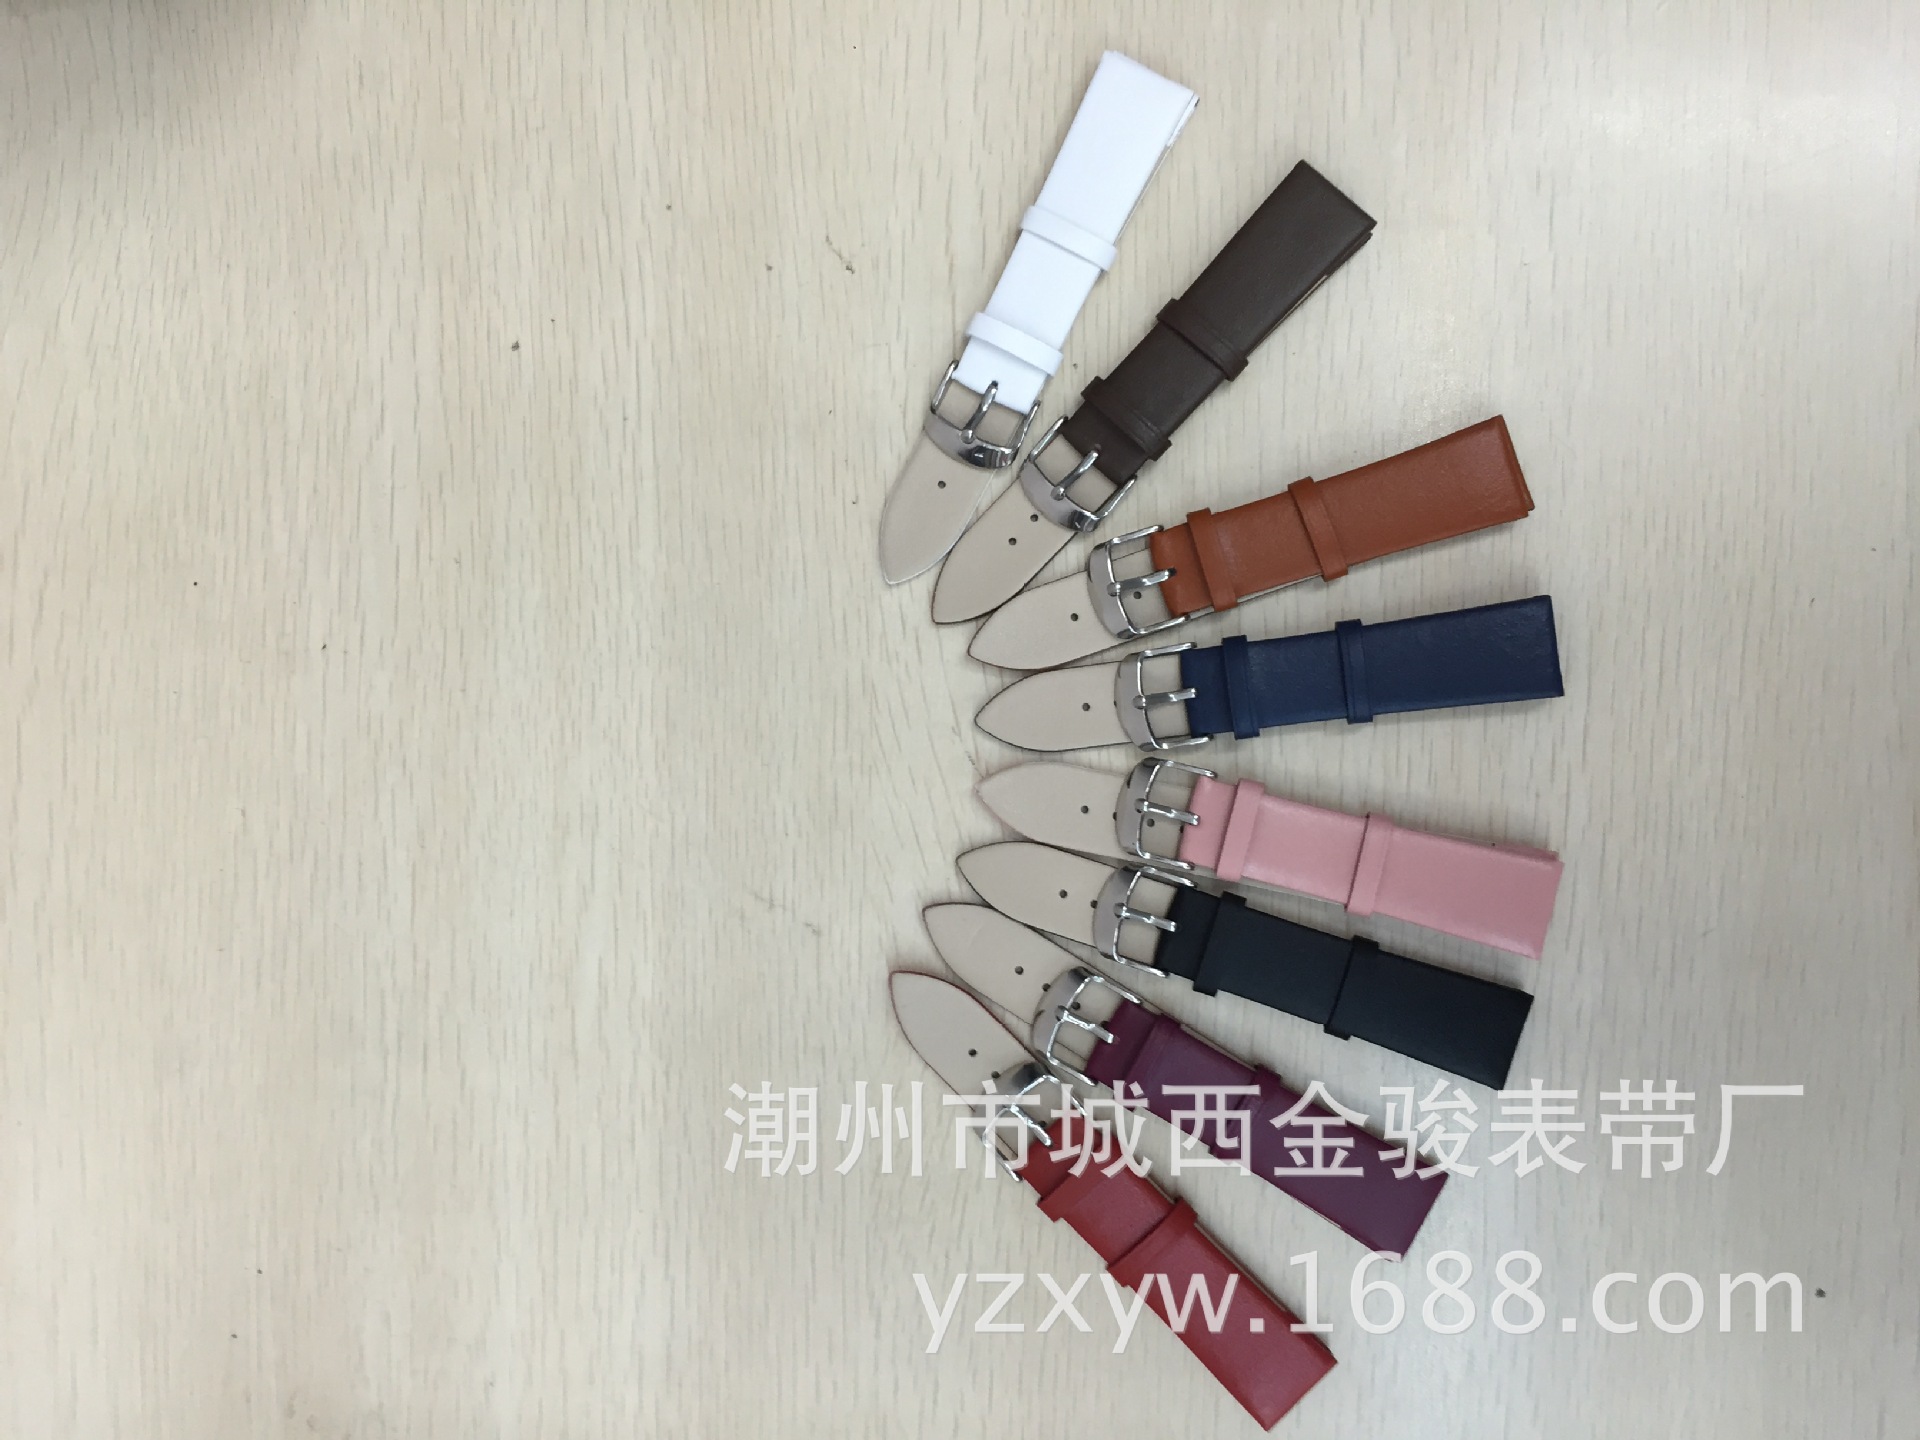 Leather Strap Plain Plain Flat Watch with Needle Pattern Color Leather Strap Ultra-Thin Watch Strap Factory Spot Calf Leather Needle